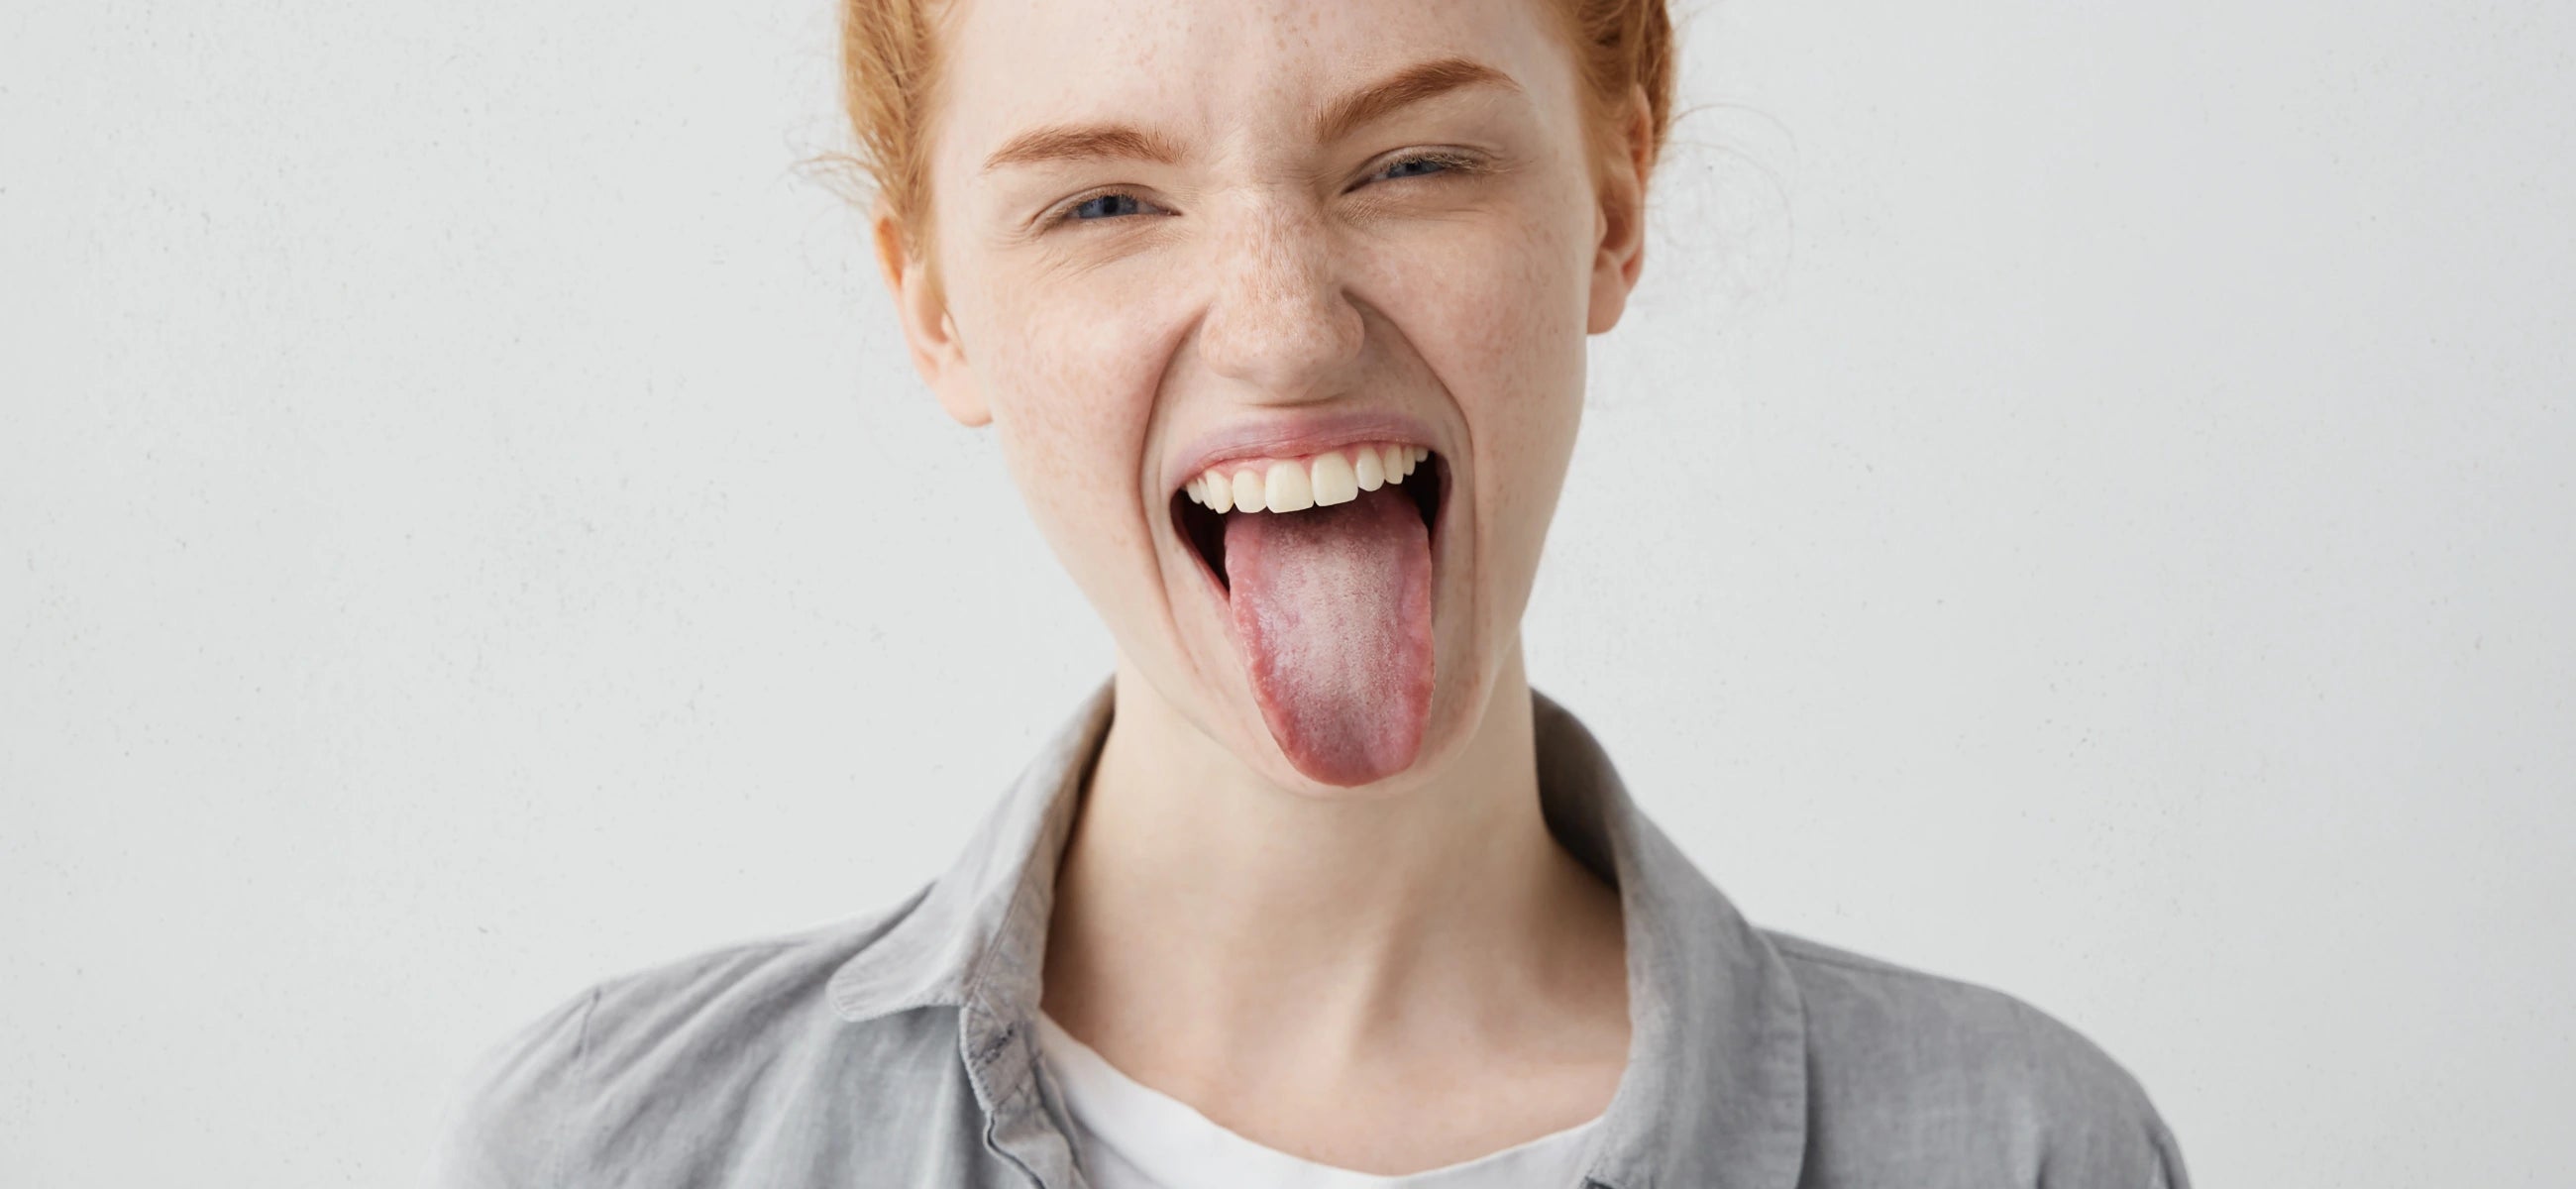 What is white tongue? Definition, causes, and treatment